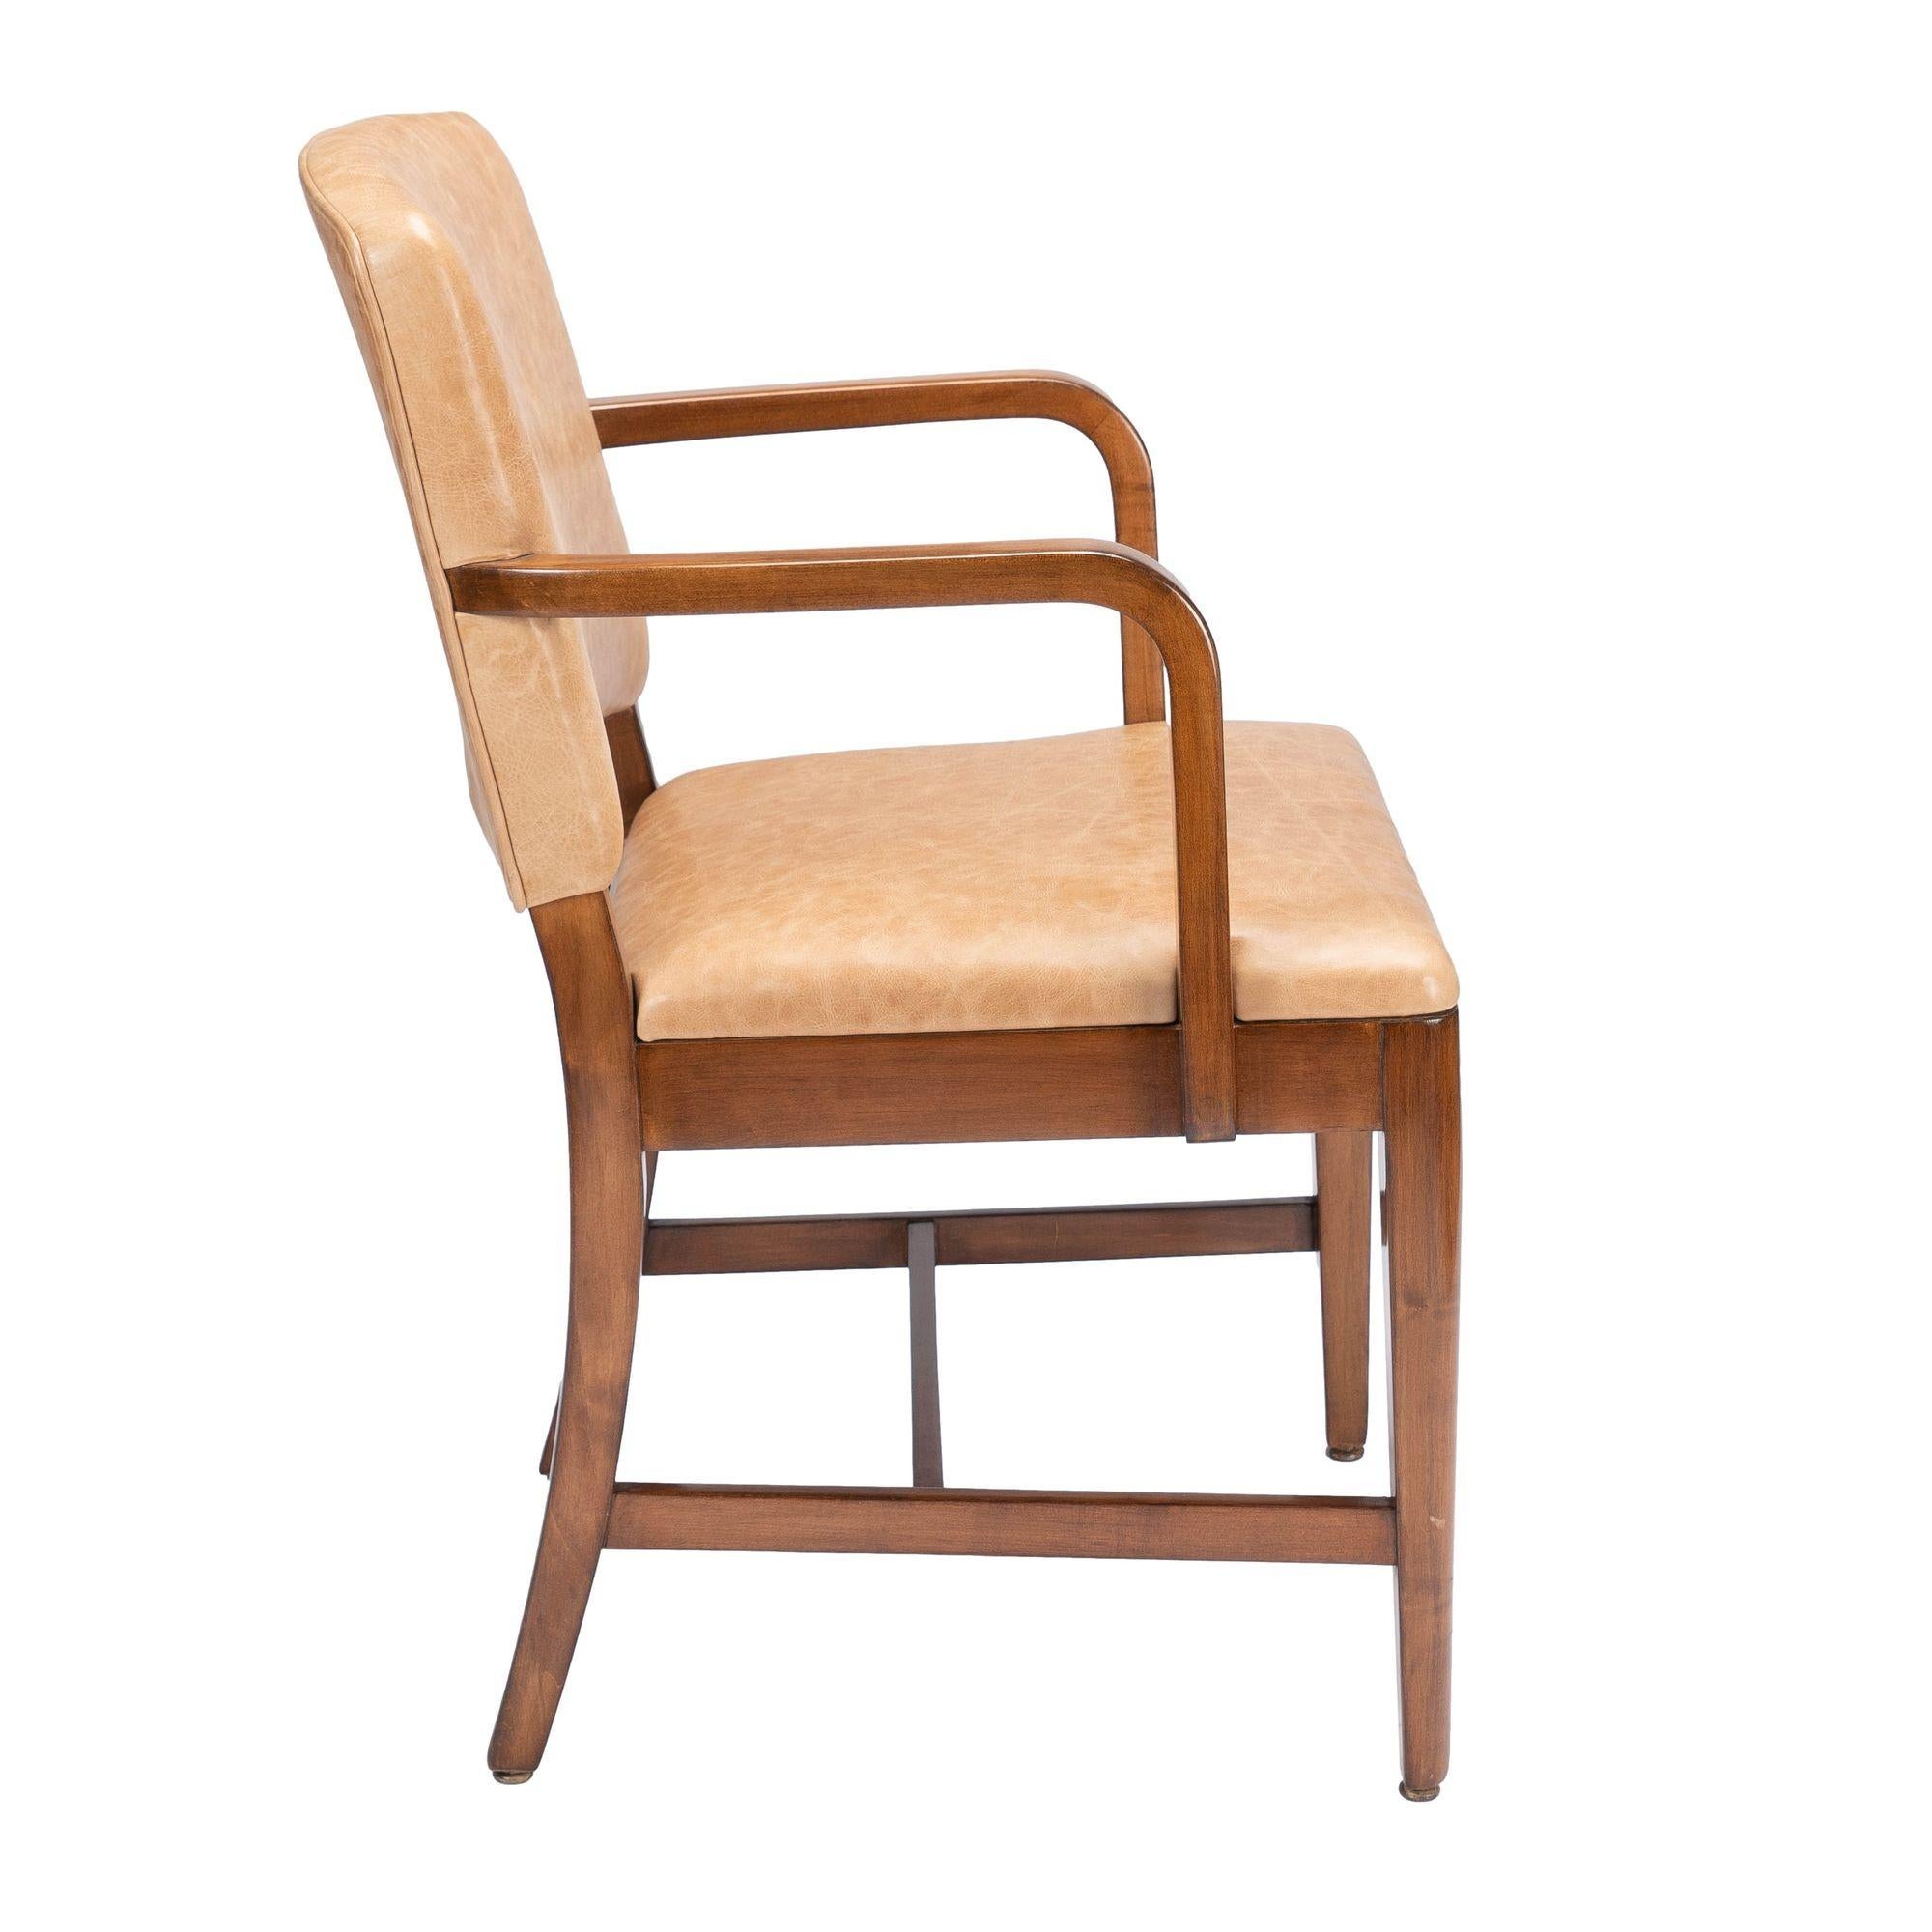 American Modernist Maple & Leather Armchair, c. 1940 For Sale 2